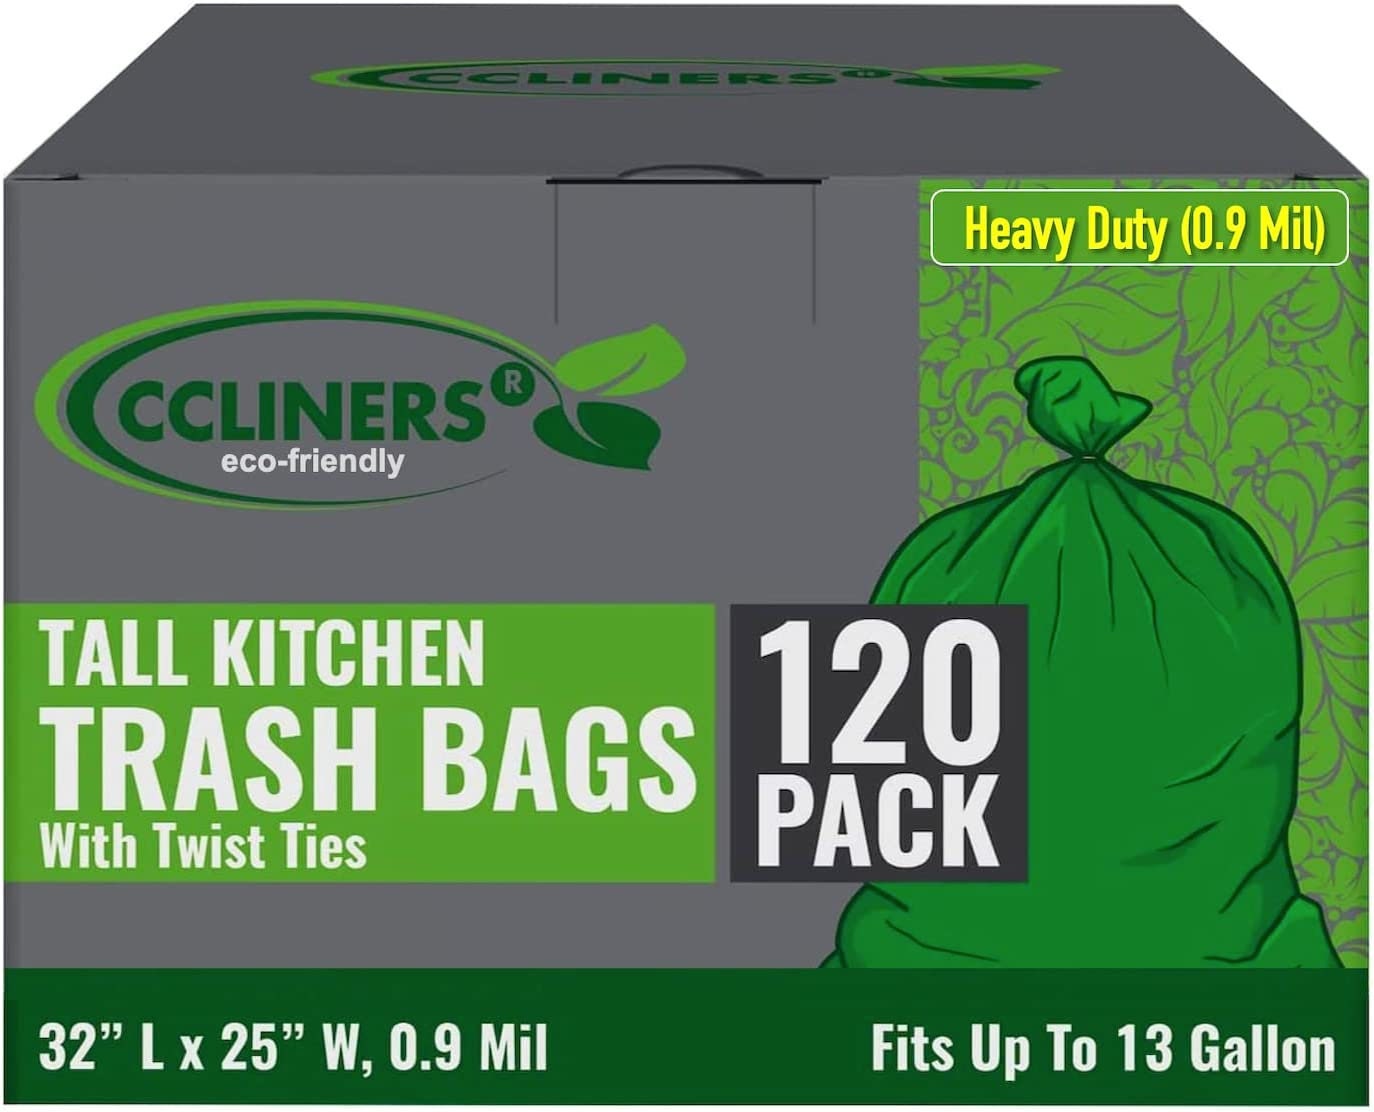 8 Gallon Trash Bags Biodegradeable Medium Garbage Bags, Extra Strong  Trash-Can-Liner for Bathroom Kitchen Office (120 Counts, 30 Liter, Green) 